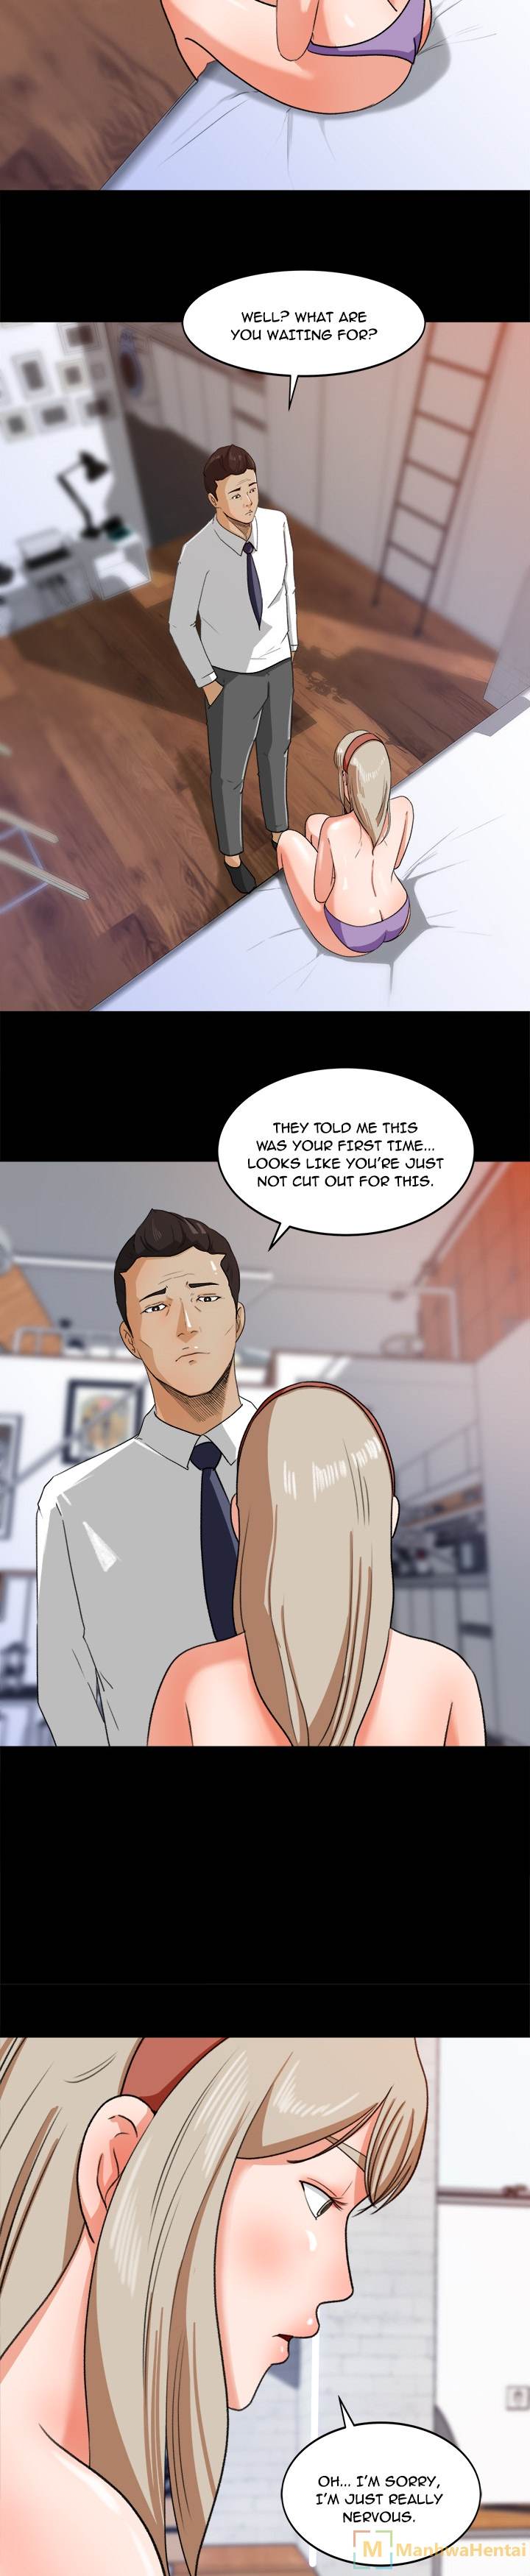 Inside the Uniform - Chapter 30 Page 9